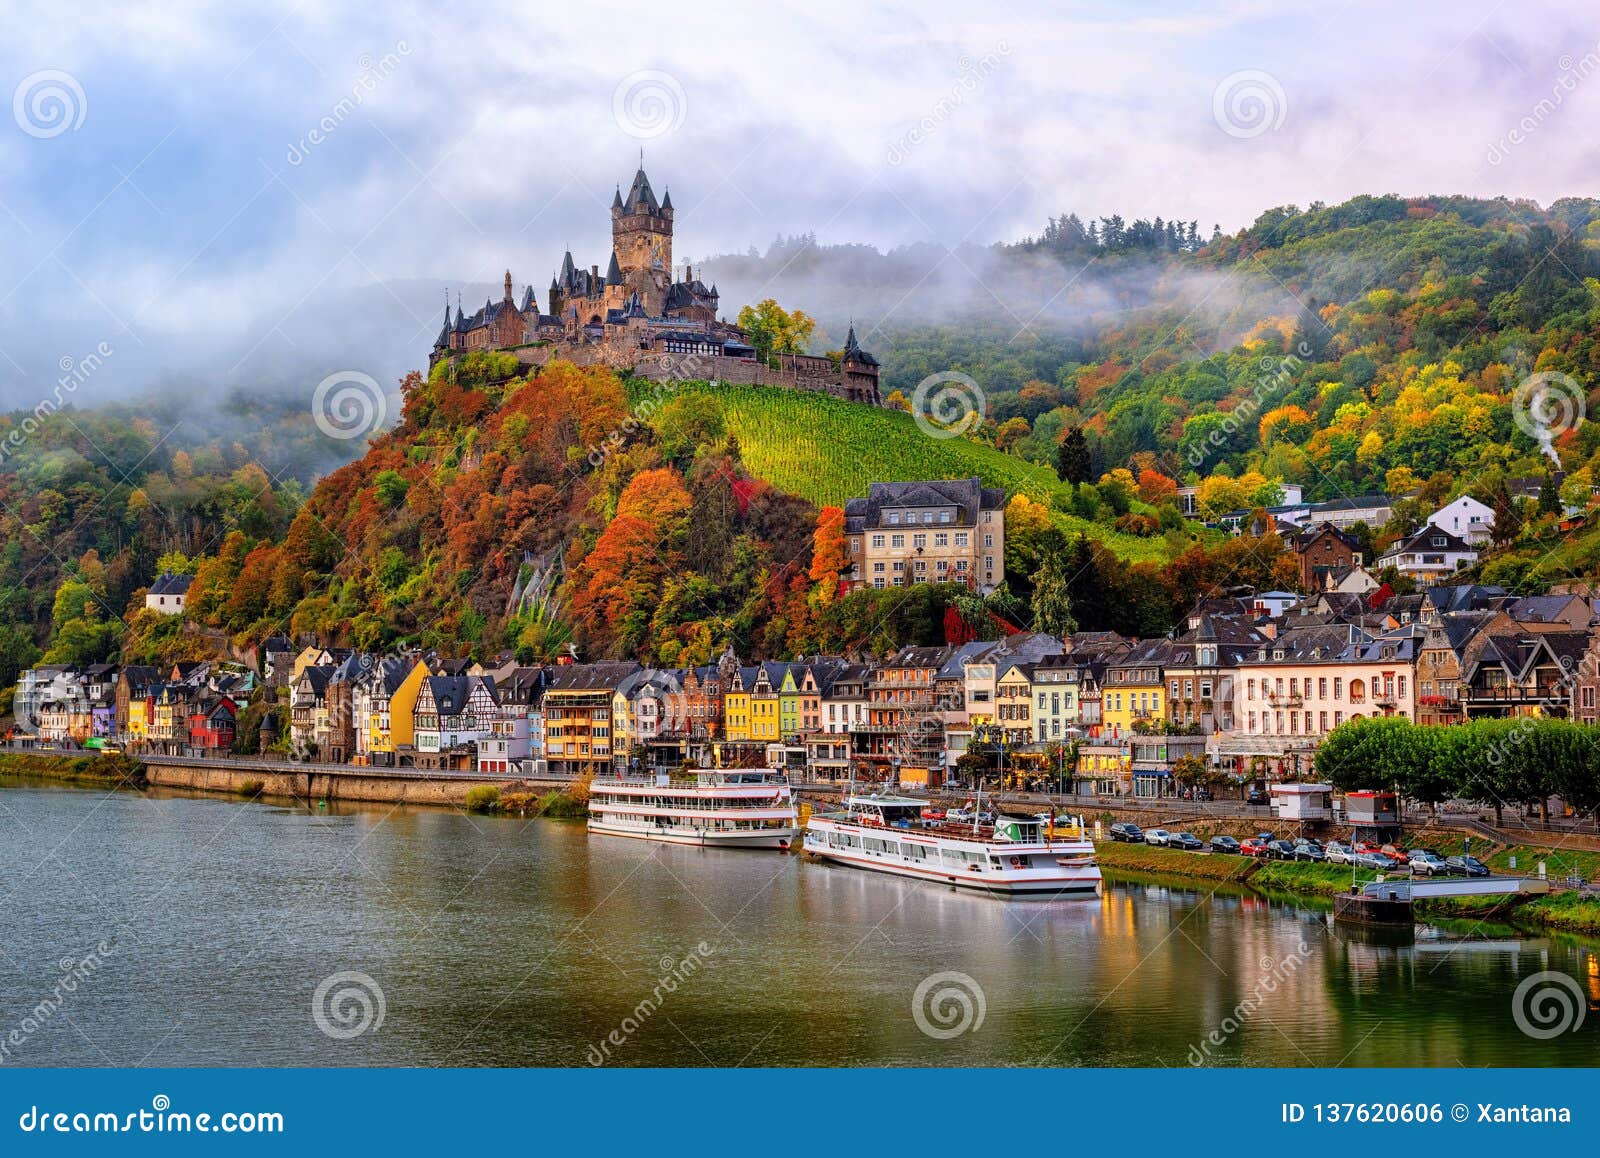 cochem, a beautiful historical town on romantic moselle river, germany